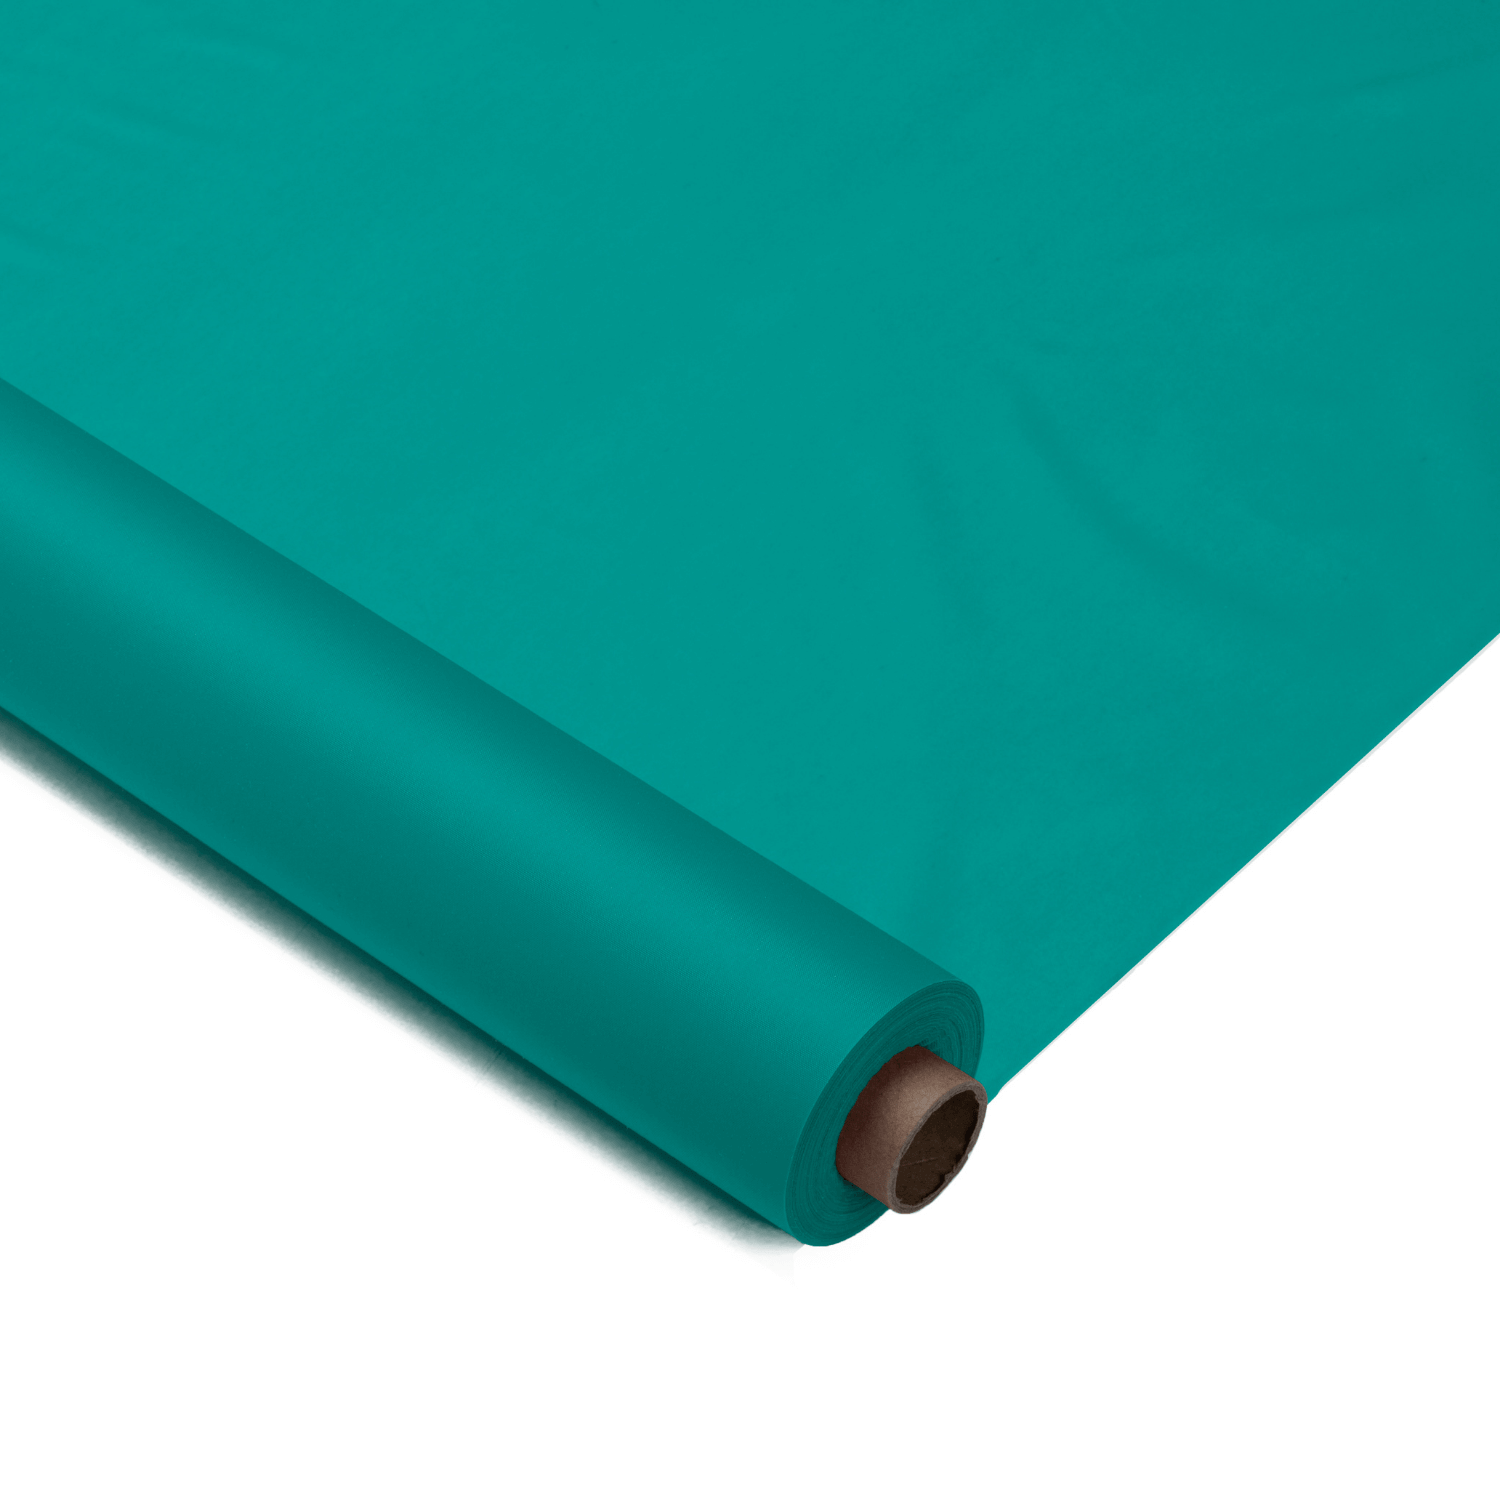 40 In. X 300 Ft. Premium Teal Plastic Table Roll | 4 Pack - Yom Tov Settings